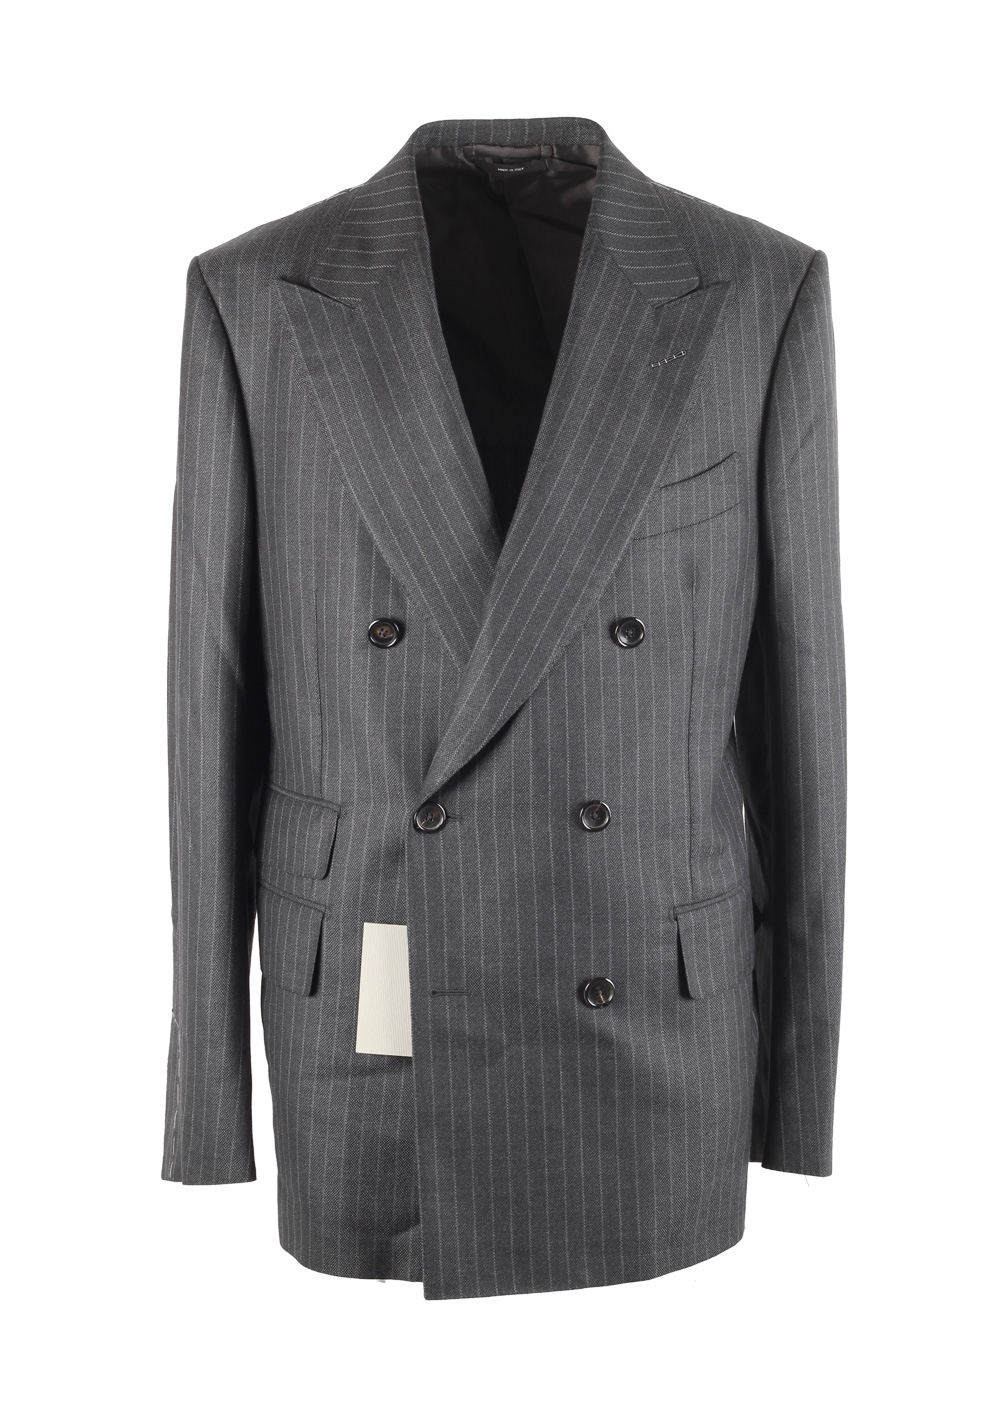 TOM FORD Shelton Gray Double Breasted Suit Size 50 / 40R U.S. | Costume ...